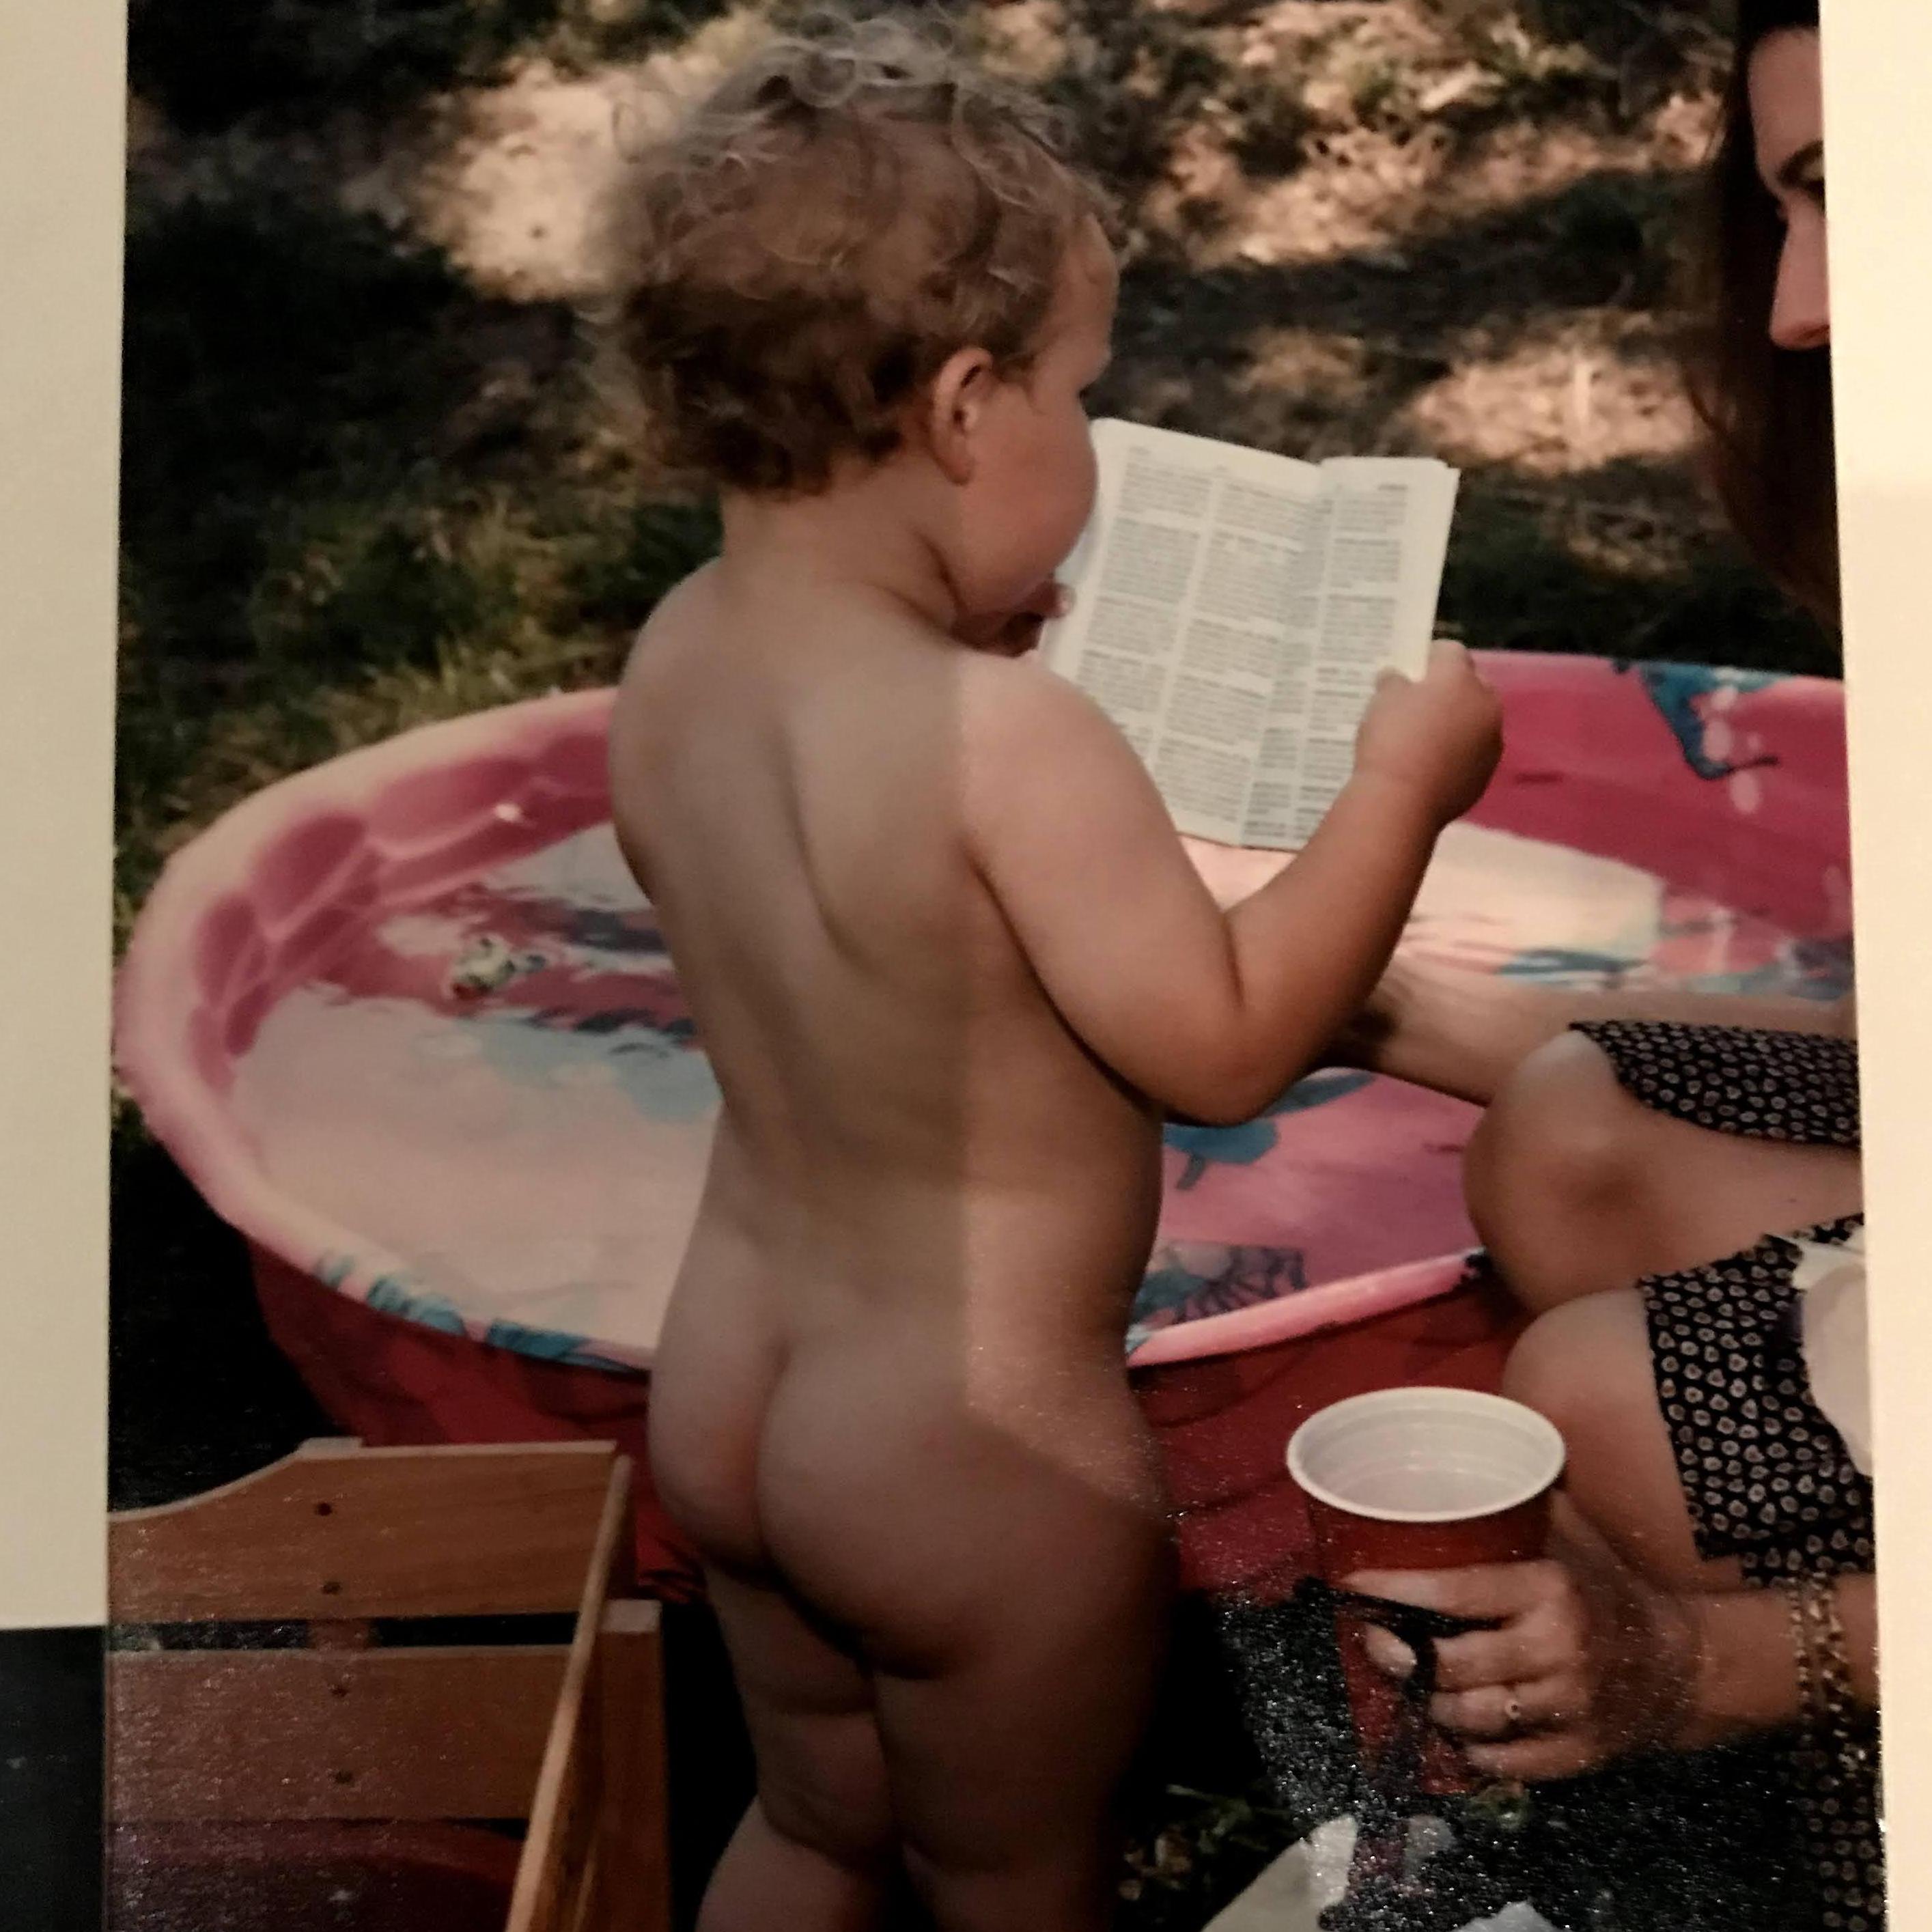 a baby bride seen here reading the Bible, butt naked, someone else holding her drink (similar scenes expected on the wedding day)